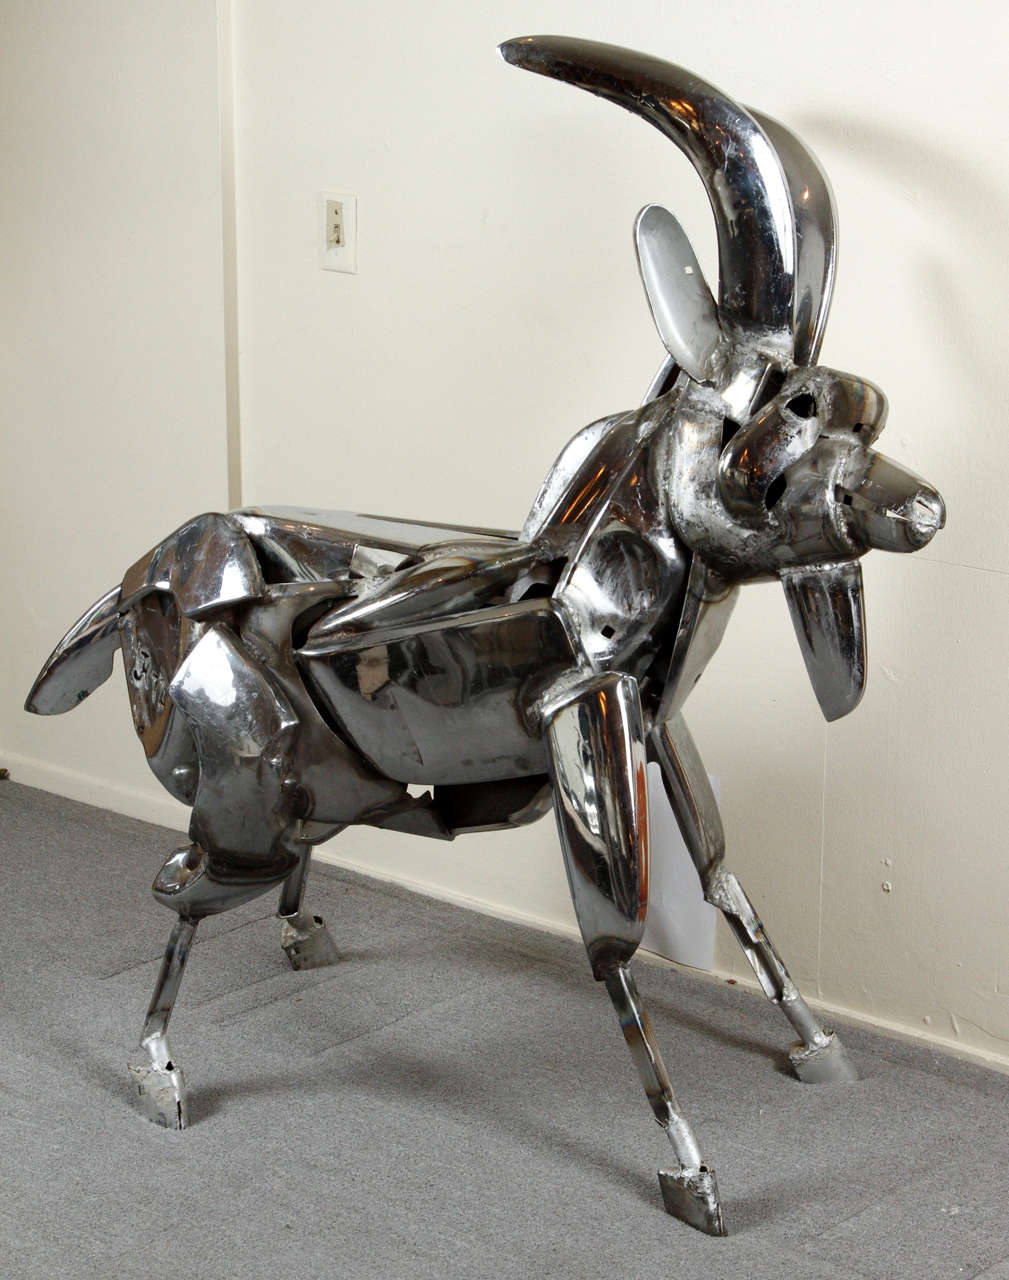 Fabulous chrome goat. Large sculpture by John Kearney.

Mr. Kearney was famous for his droll and amusing sculptures of animals made from discarded car bumpers and chrome parts. They are life sized and surprisingly beautiful and realistic, given